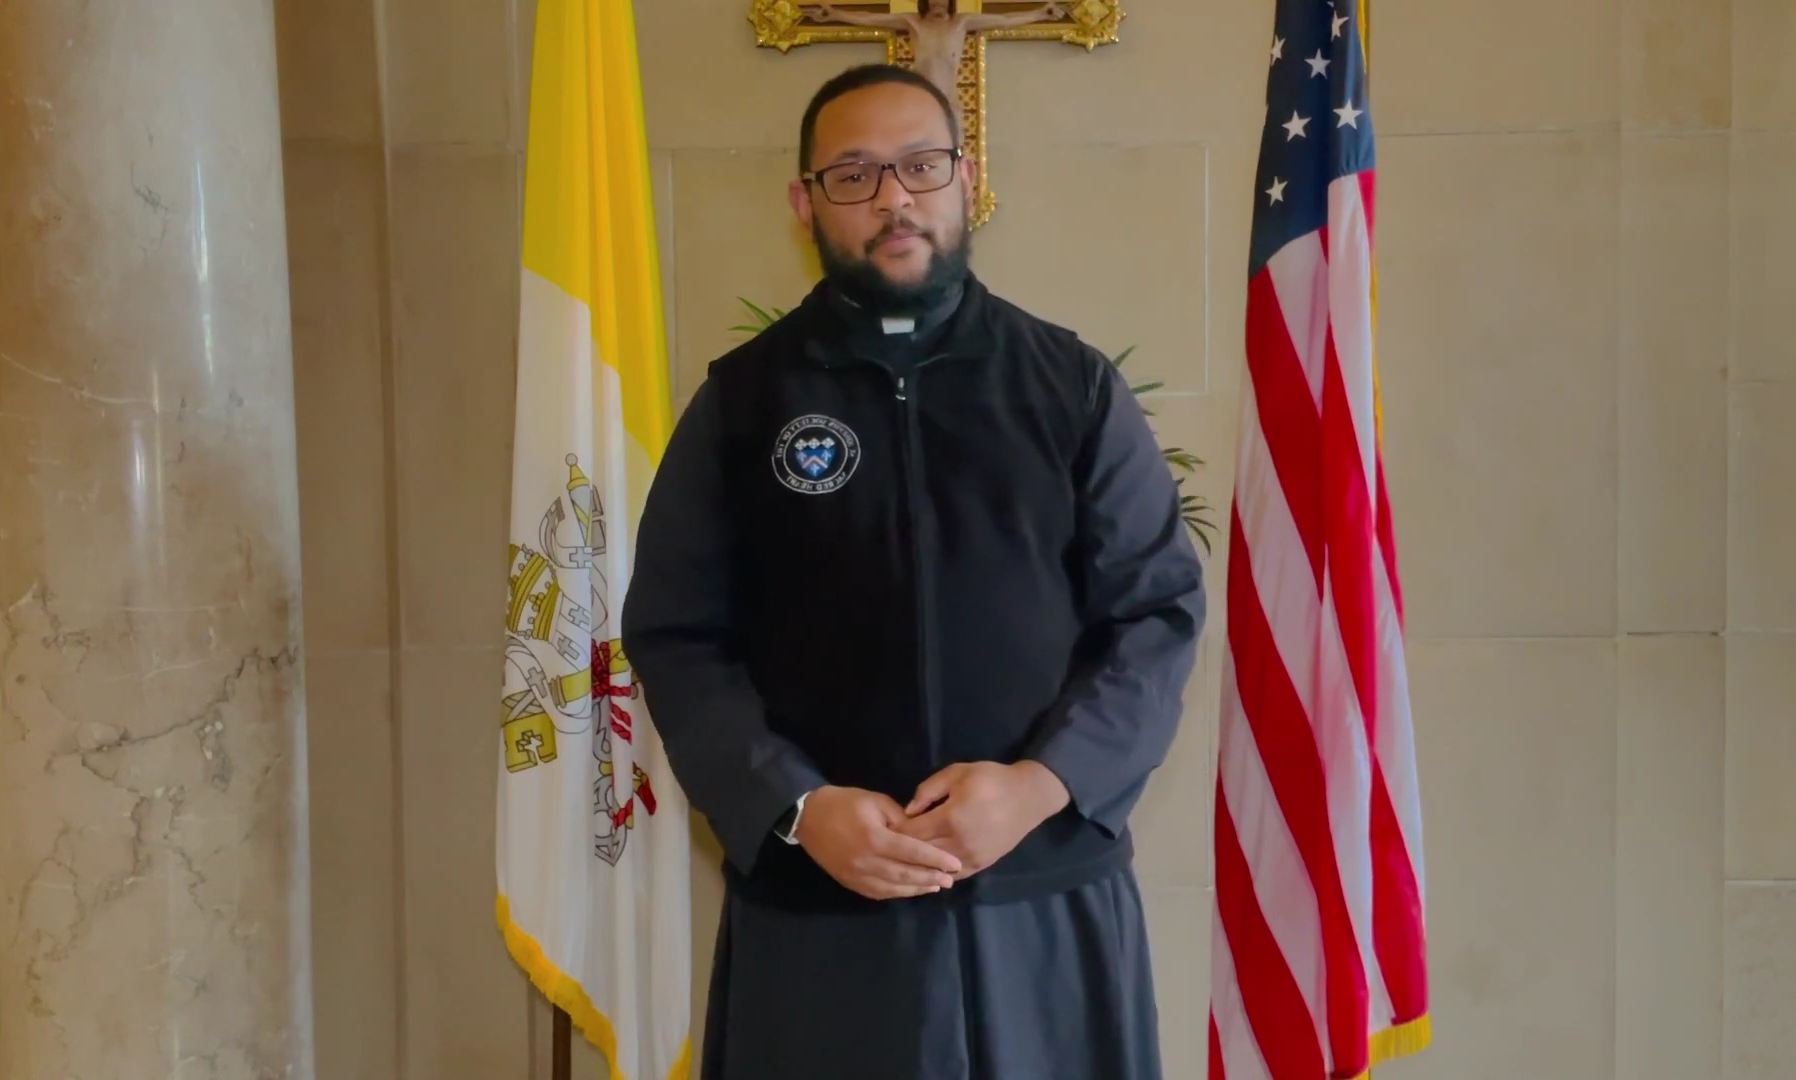 African-American Josephite seminarian receiving ministry of acolyte on Saturday